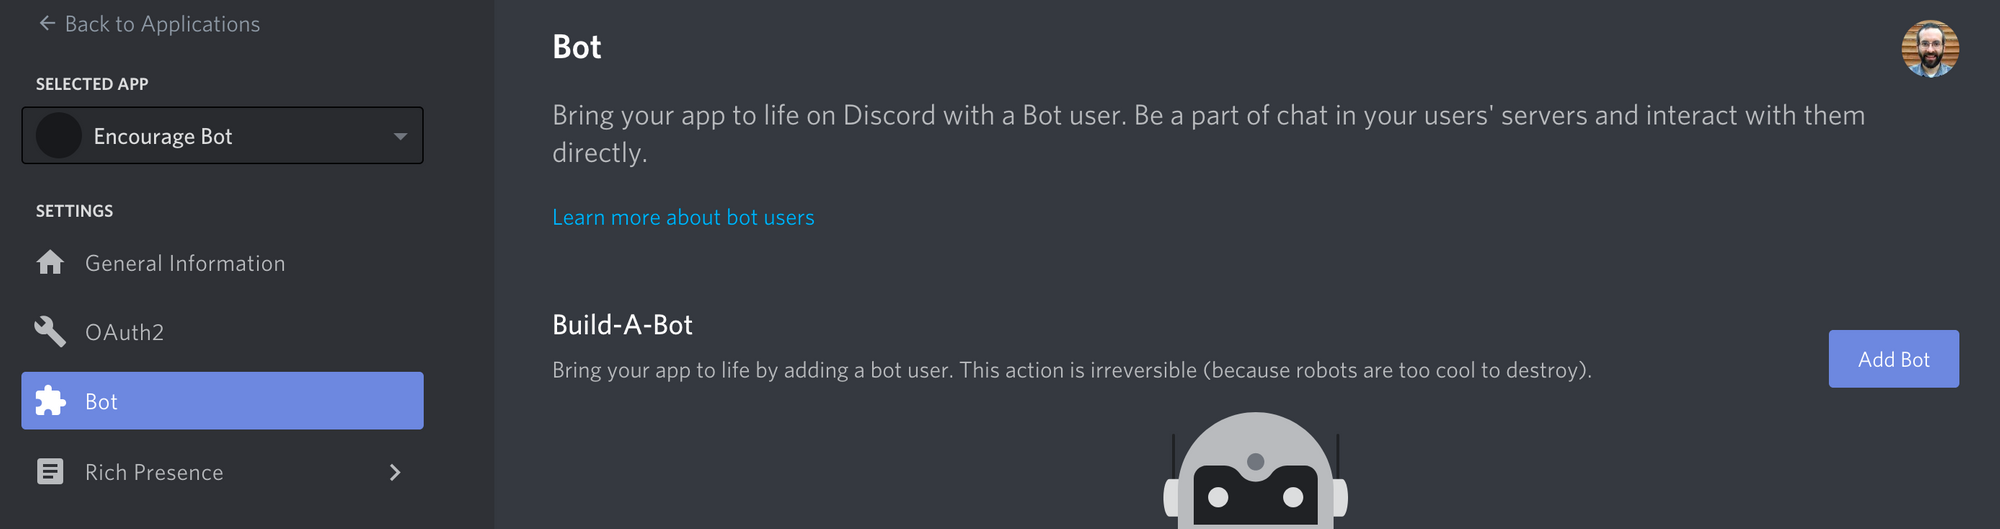 How To Create A Discord Bot For Free With Python Full Tutorial